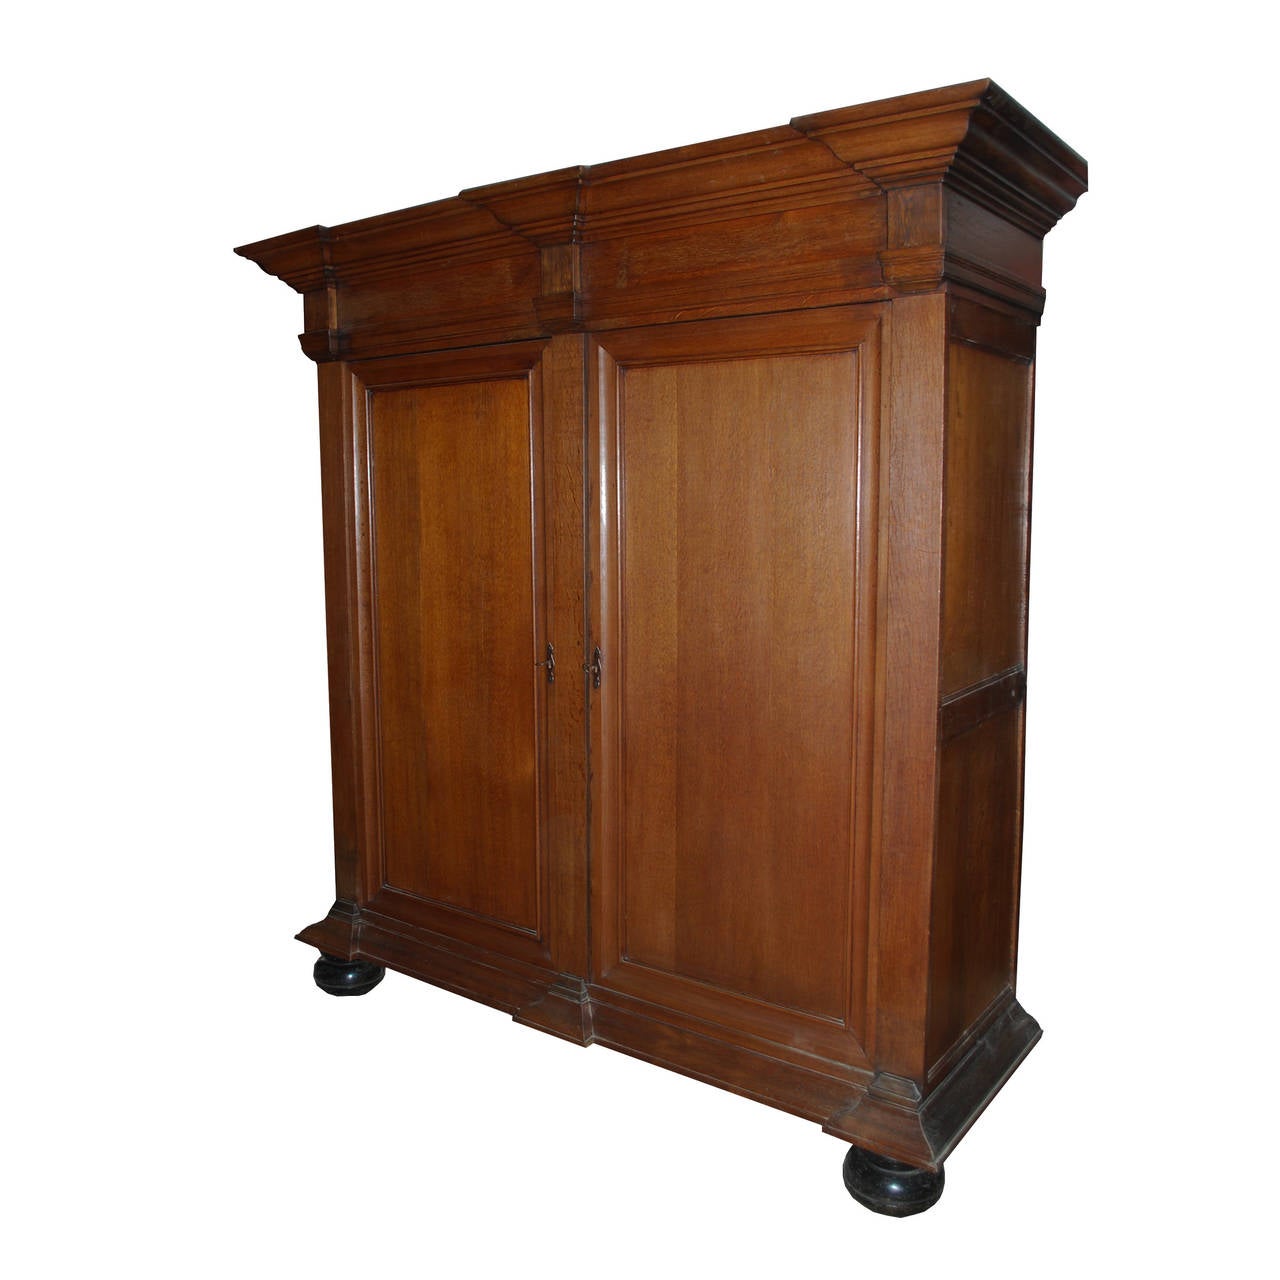 Original Dutch oakwood cabinet which can be taken apart.
Originates from Holland, circa 1790.
